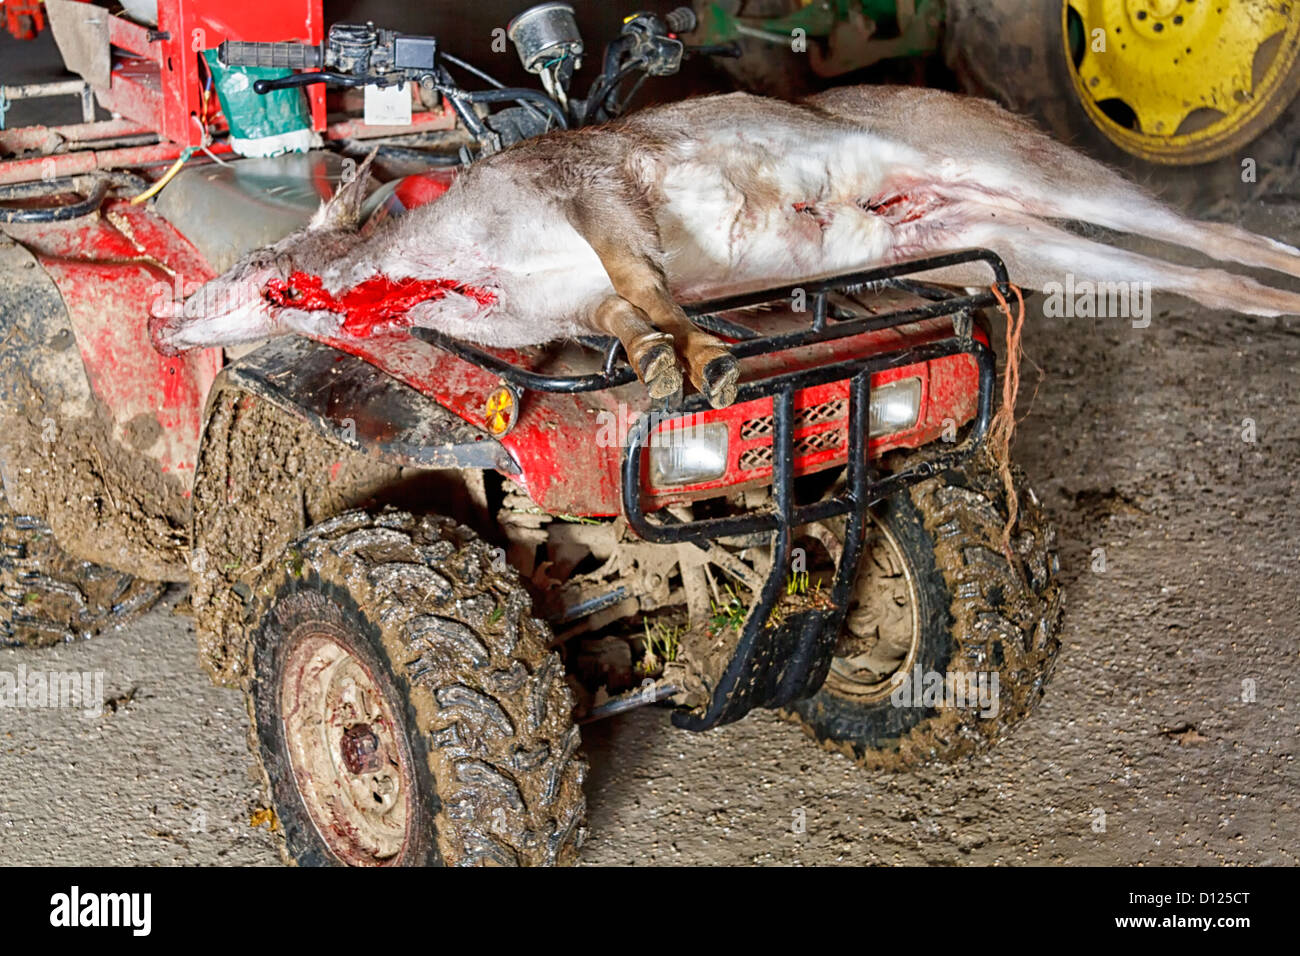 Deer carcass on the carrier of a quad bike Stock Photo